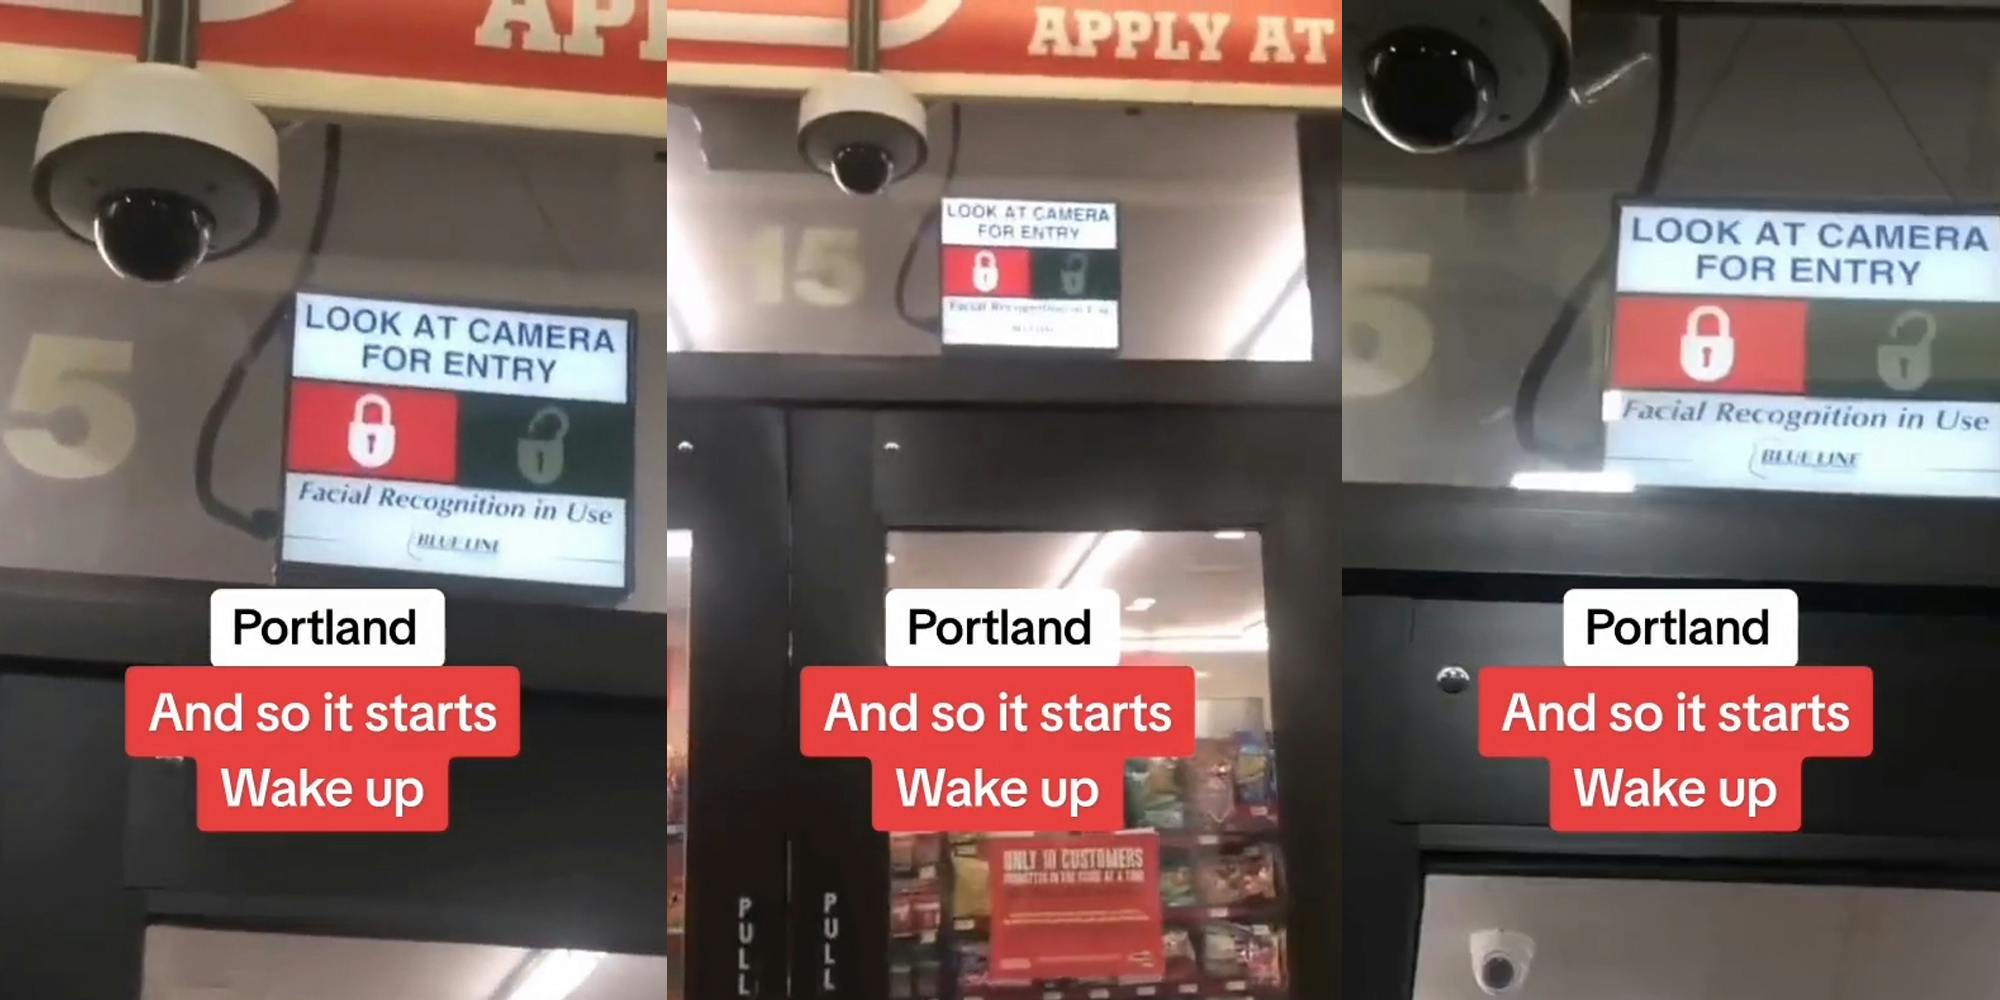 security camera with screen outside of store entrance with caption "Portland And so it starts Wake up" (l) security camera with screen outside of store entrance with caption "Portland And so it starts Wake up" (c) security camera with screen outside of store entrance with caption "Portland And so it starts Wake up" (r)